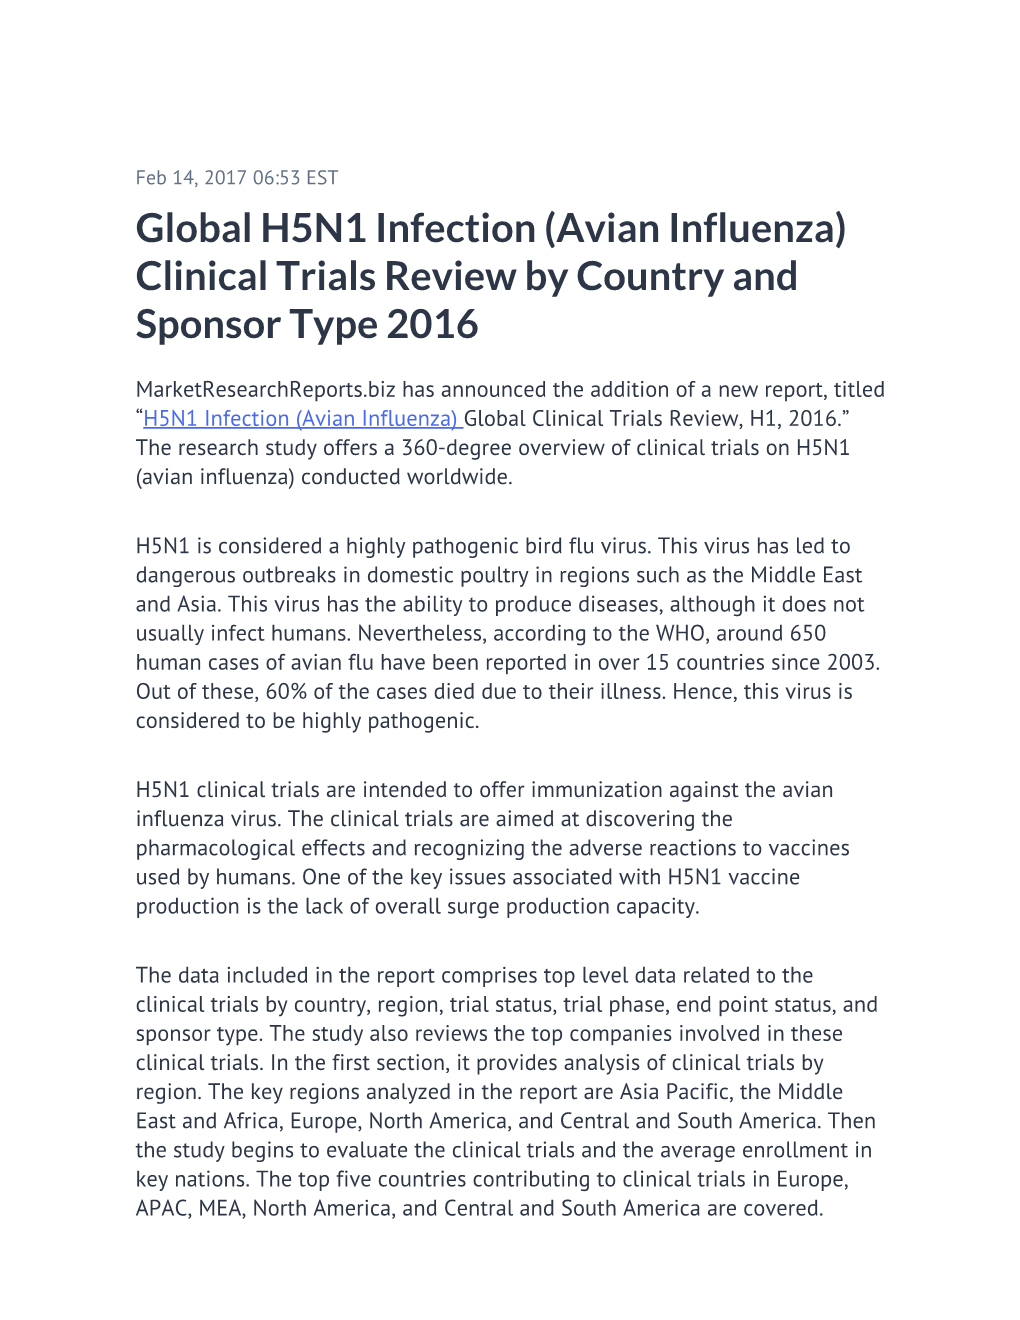 Global H5N1 Infection (Avian Influenza) Clinical Trials Review by Country and Sponsor Type 2016